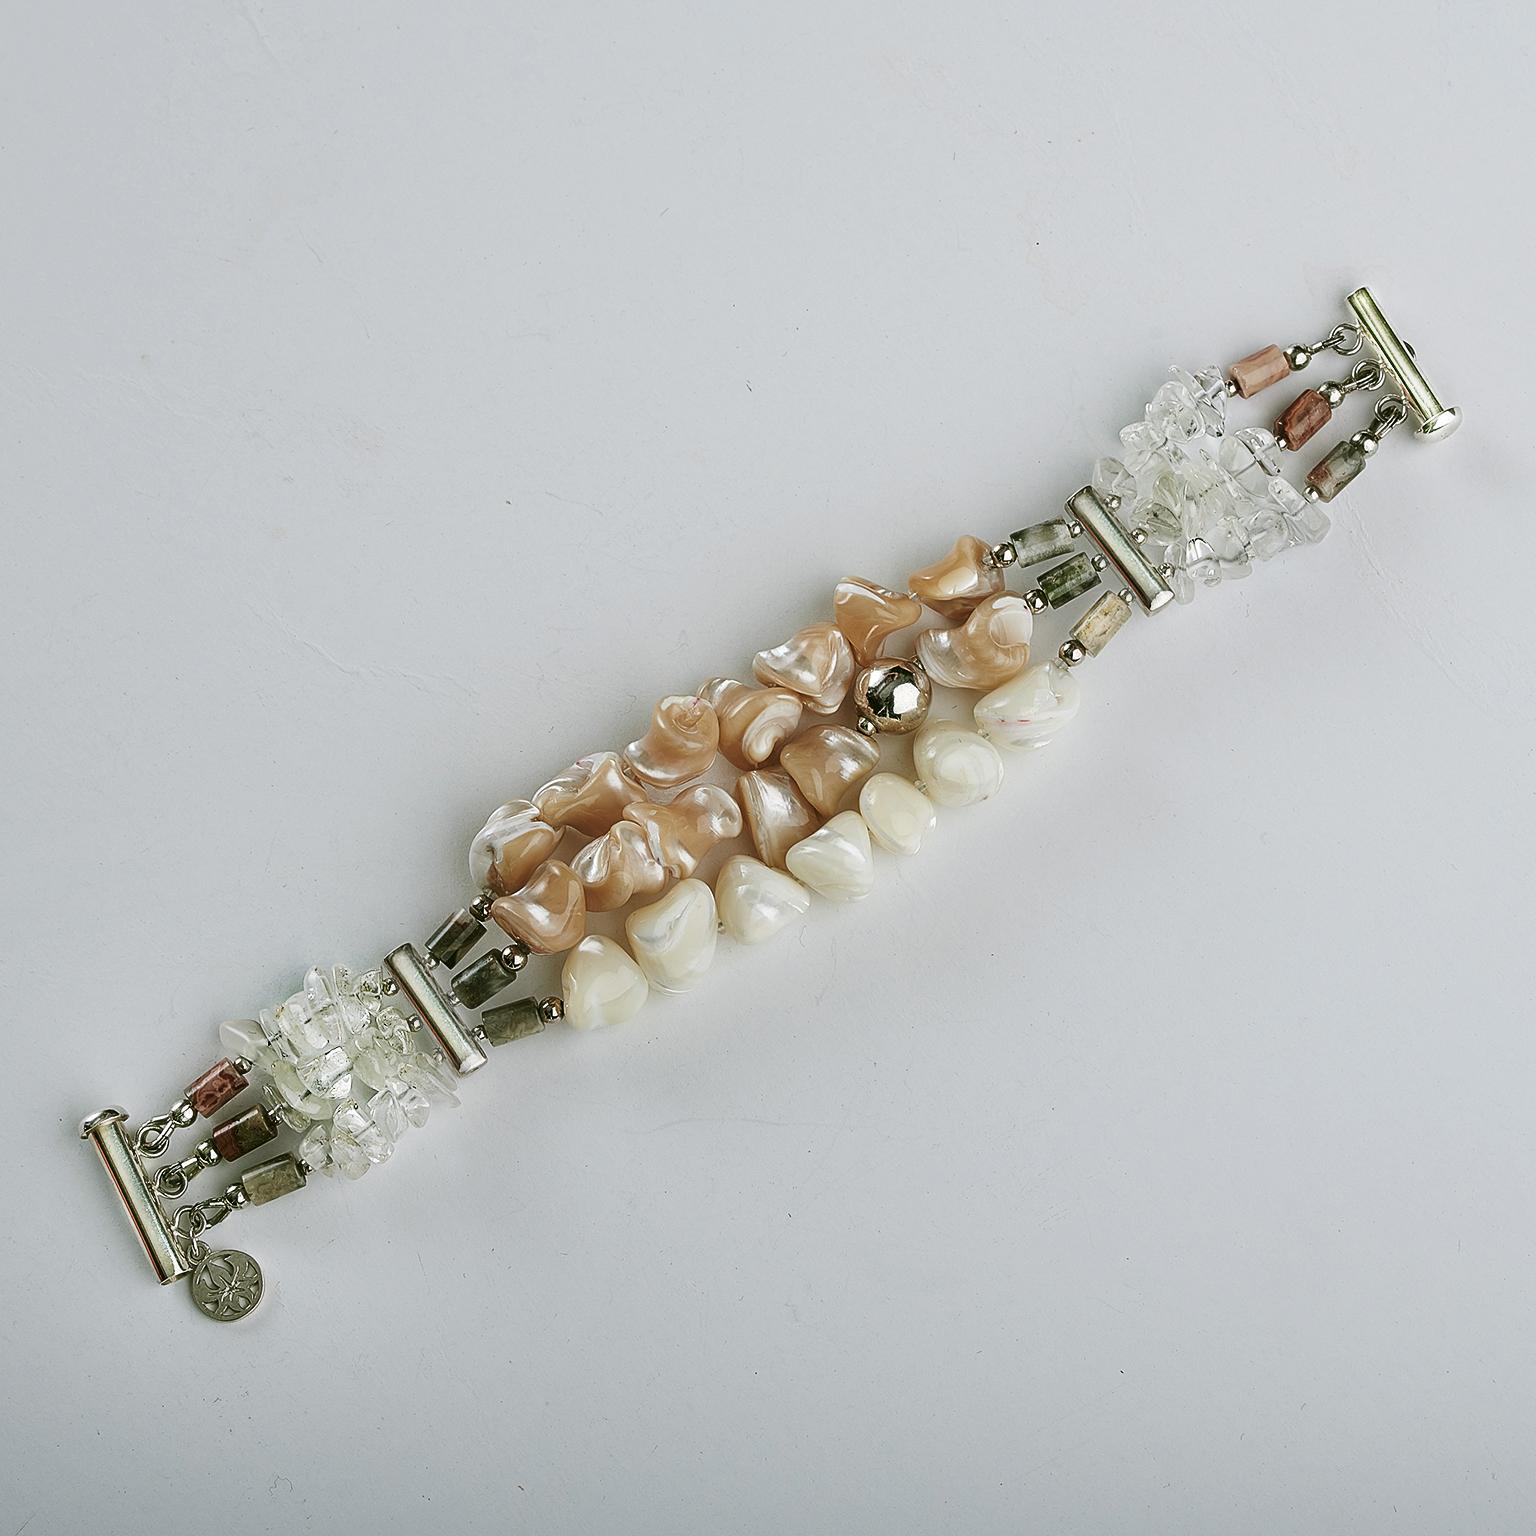 The three strand bracelet composed of naturally colored, with off-white and caramel ( MOP ) mother of pearls nugget shape trochus, 18-10 mm beads and free-form crystals that contrast beautifully with the multicolored jasper tubes, accented